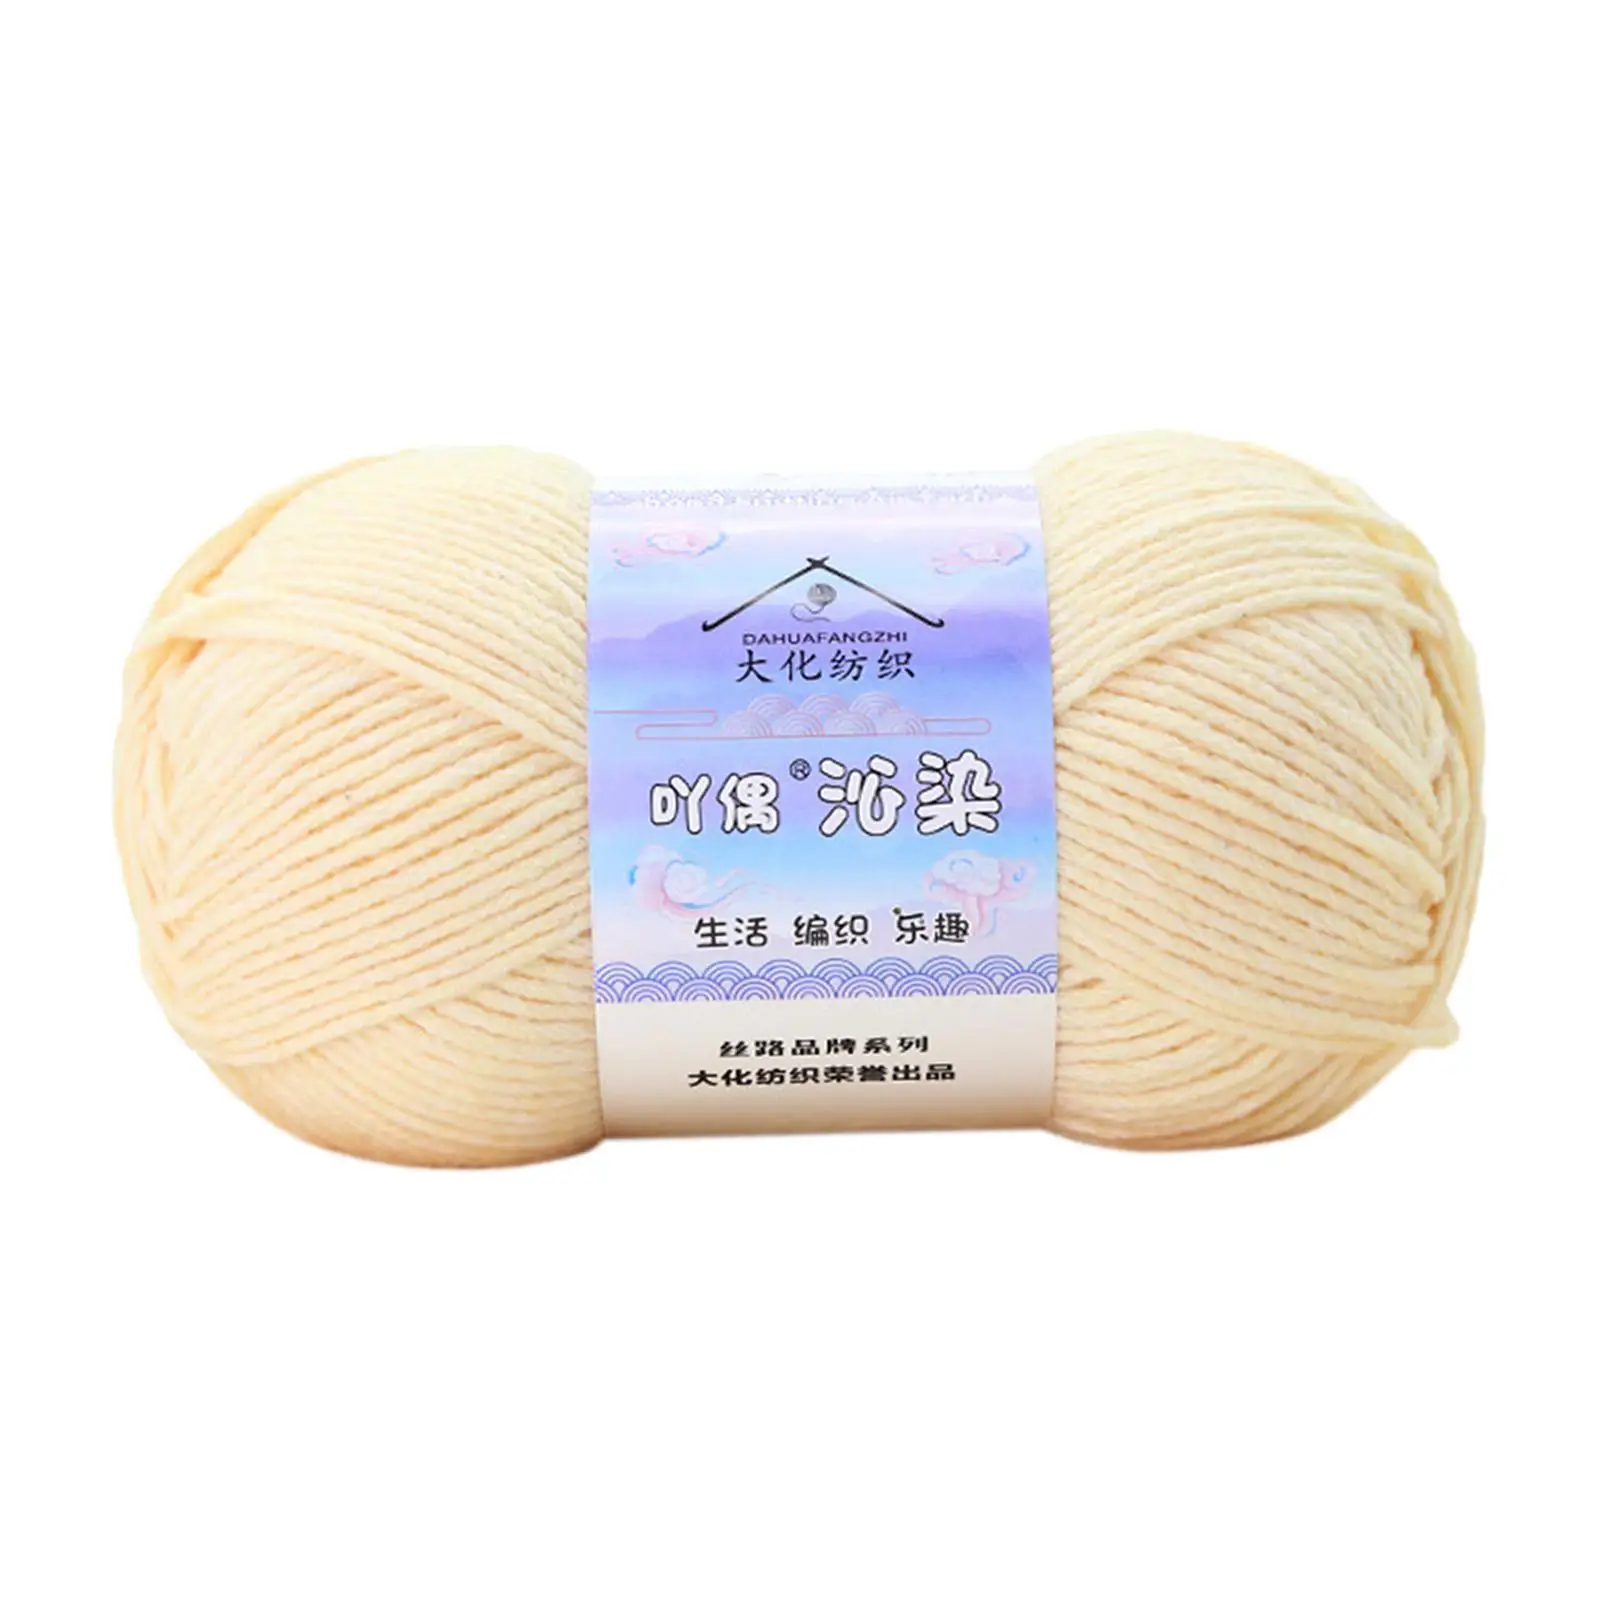 Knitting Yarn Hand Knitting Supplies Adults 175M/574ft Crochet Thread for Hats Scarves Hand Needlework Beginners Knitting